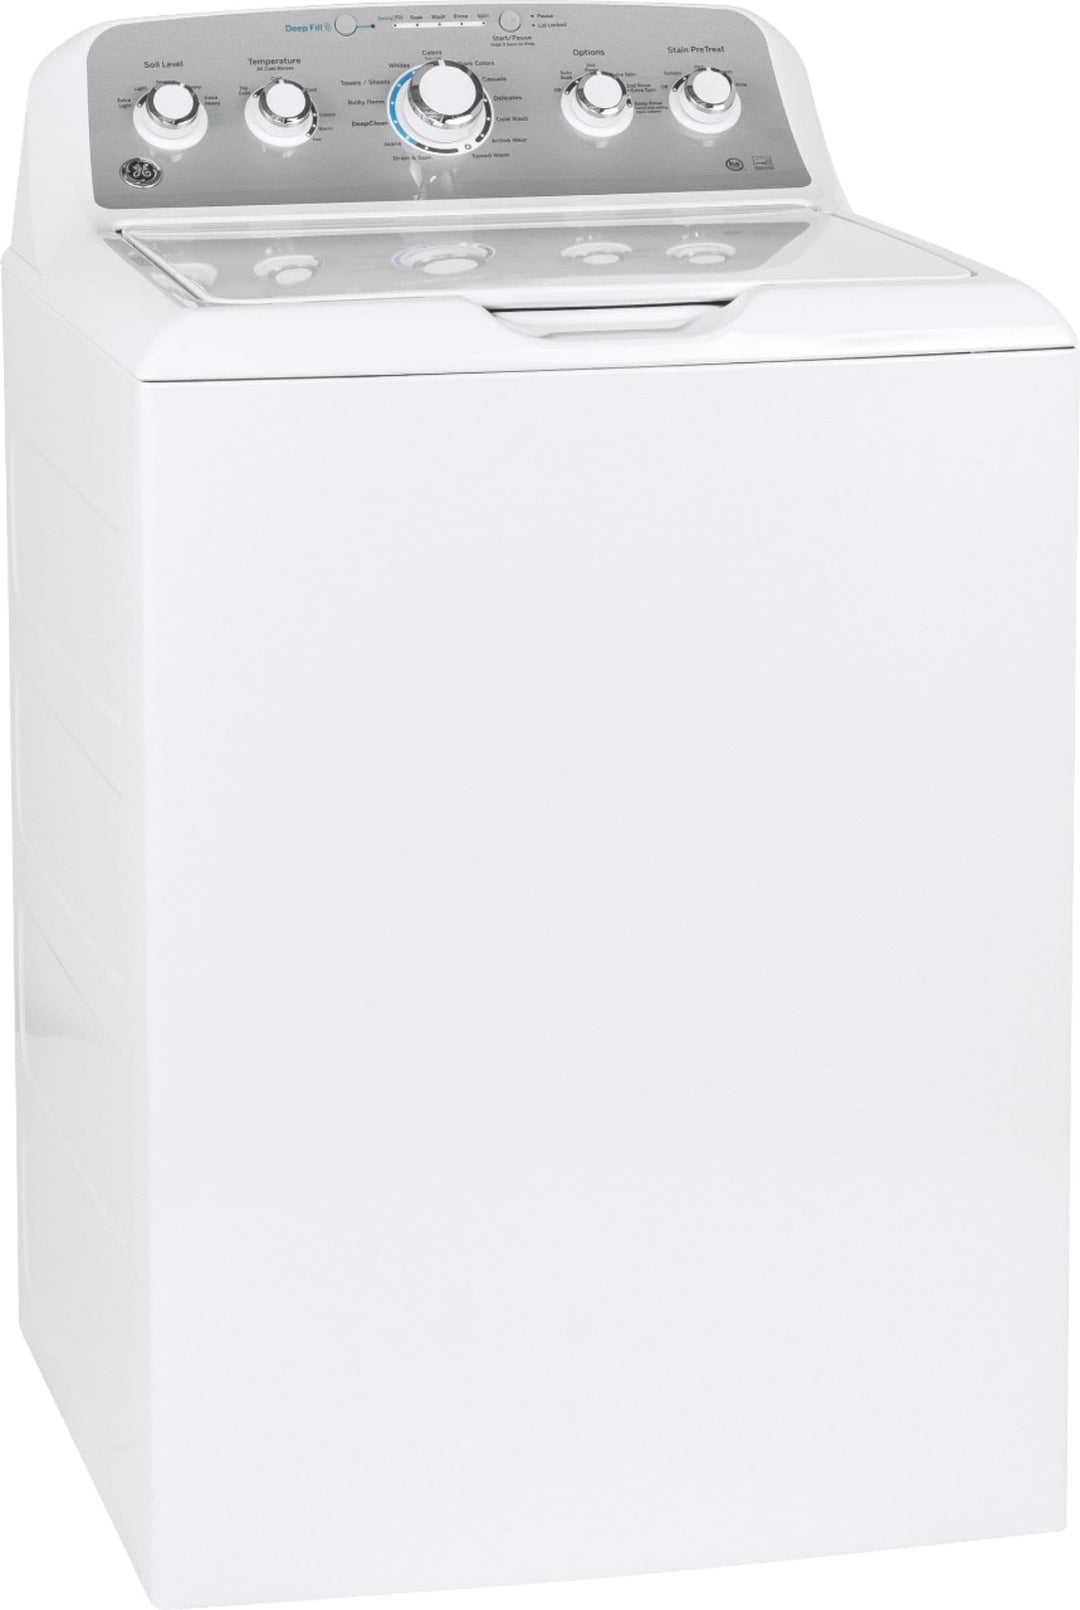 GE - 4.6 Cu. Ft.  Top Load Washer - White On White/Silver_1